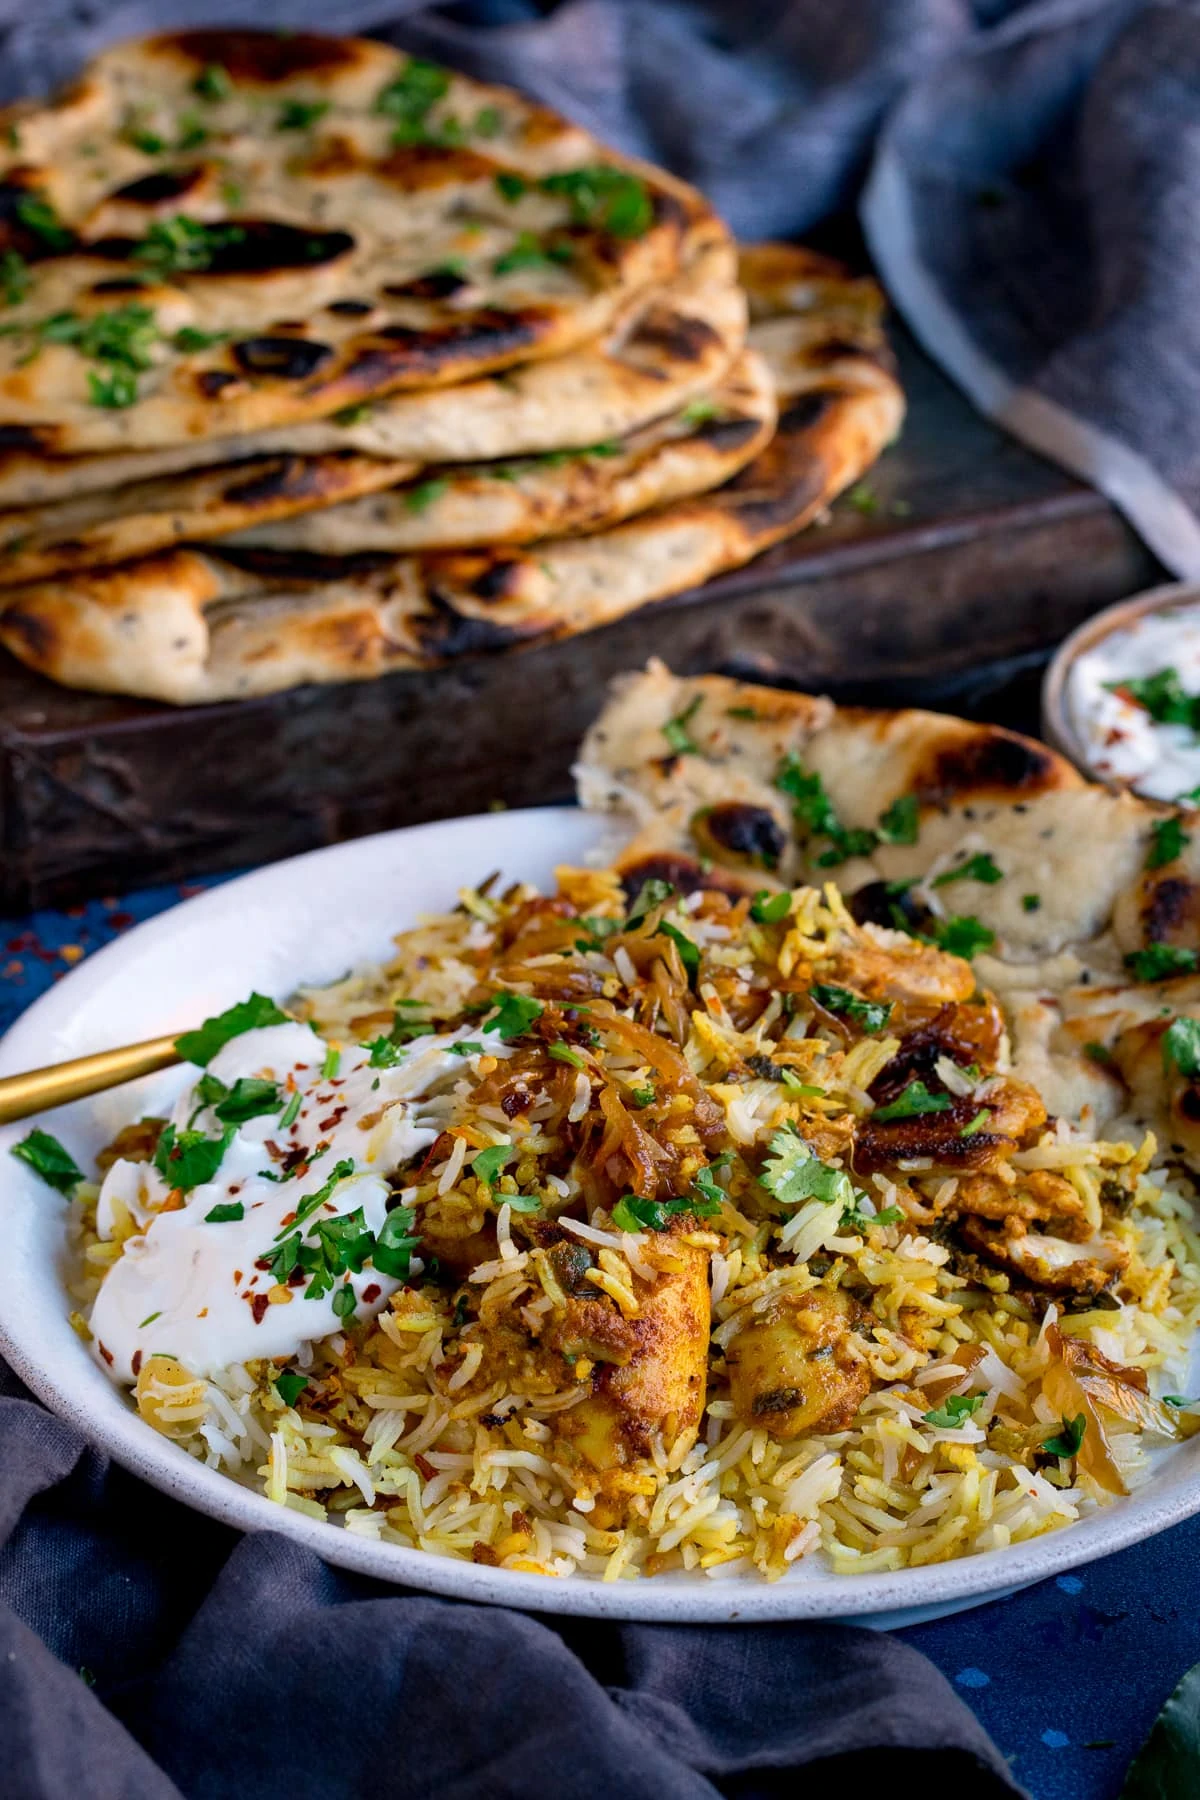 Plate of chicken biryani with pile of naan breads in the background